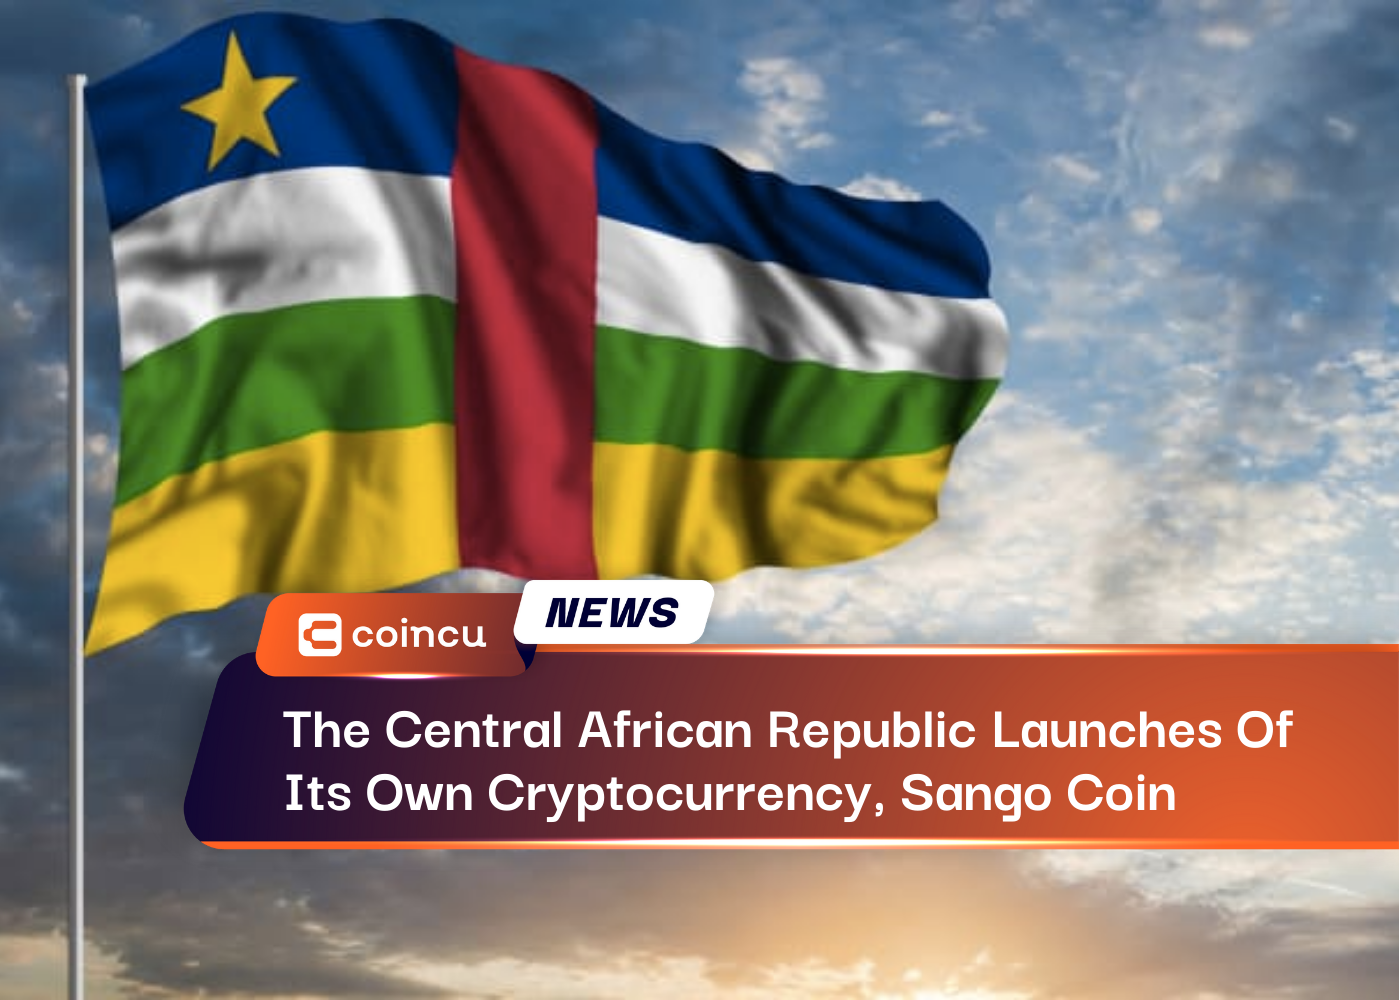 The Central African Republic Launches Of Its Own Cryptocurrency, Sango Coin